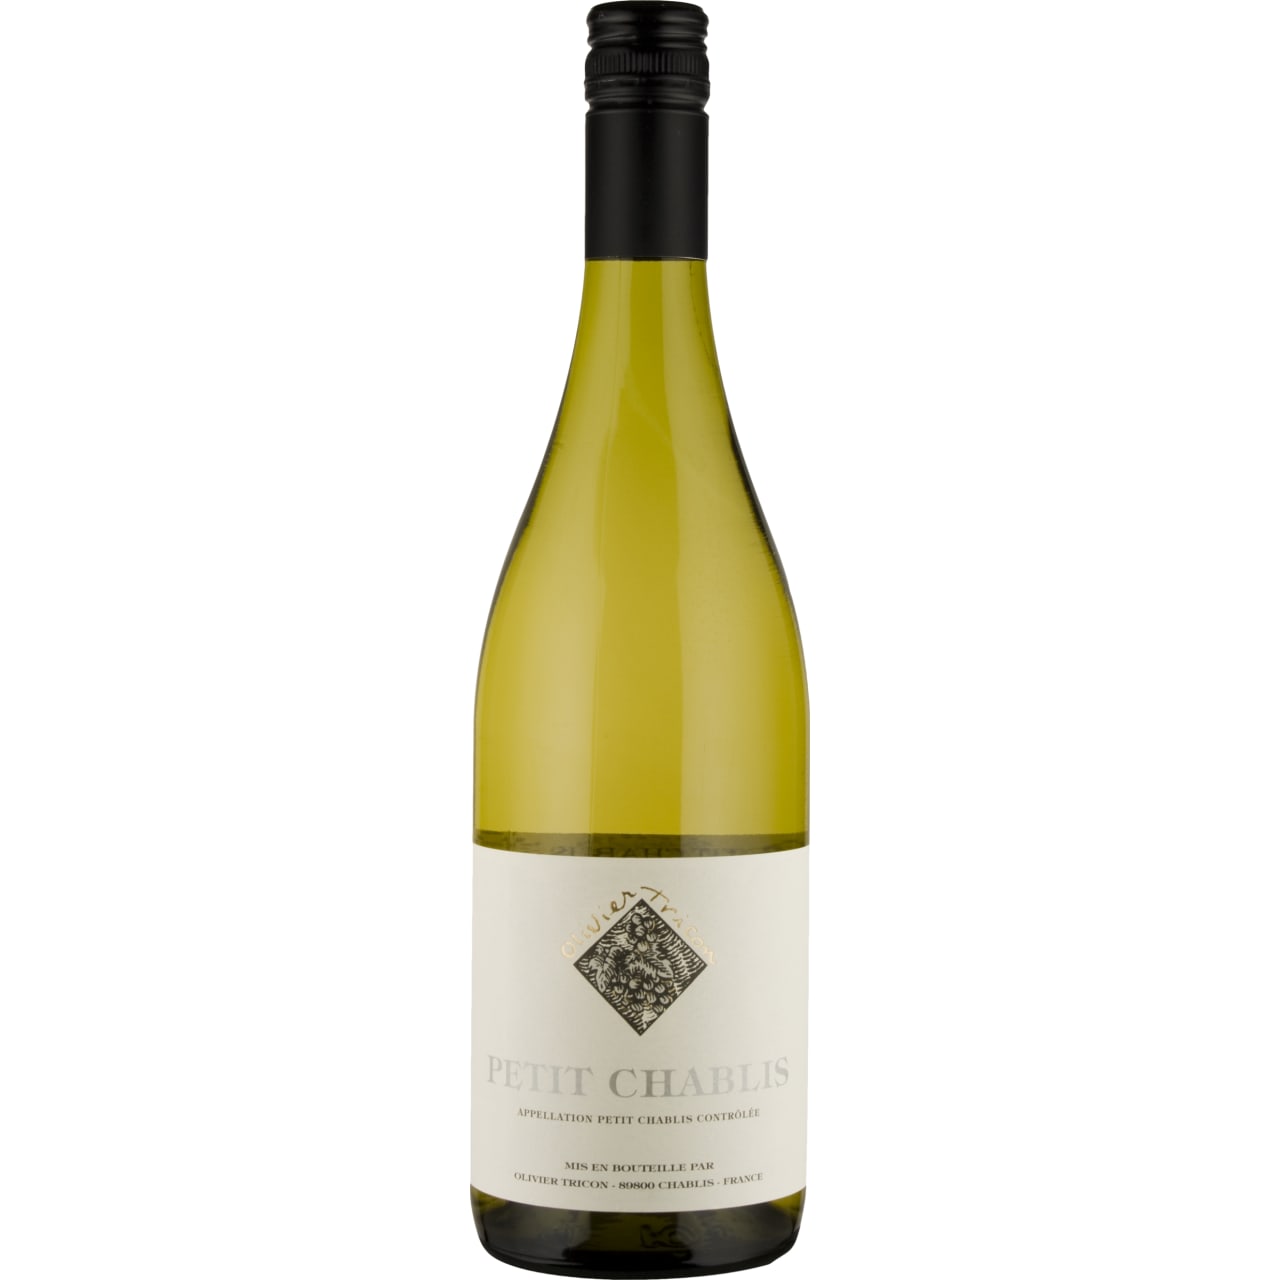 Traditional, crisp minerality and refreshing citrus-like acidity.